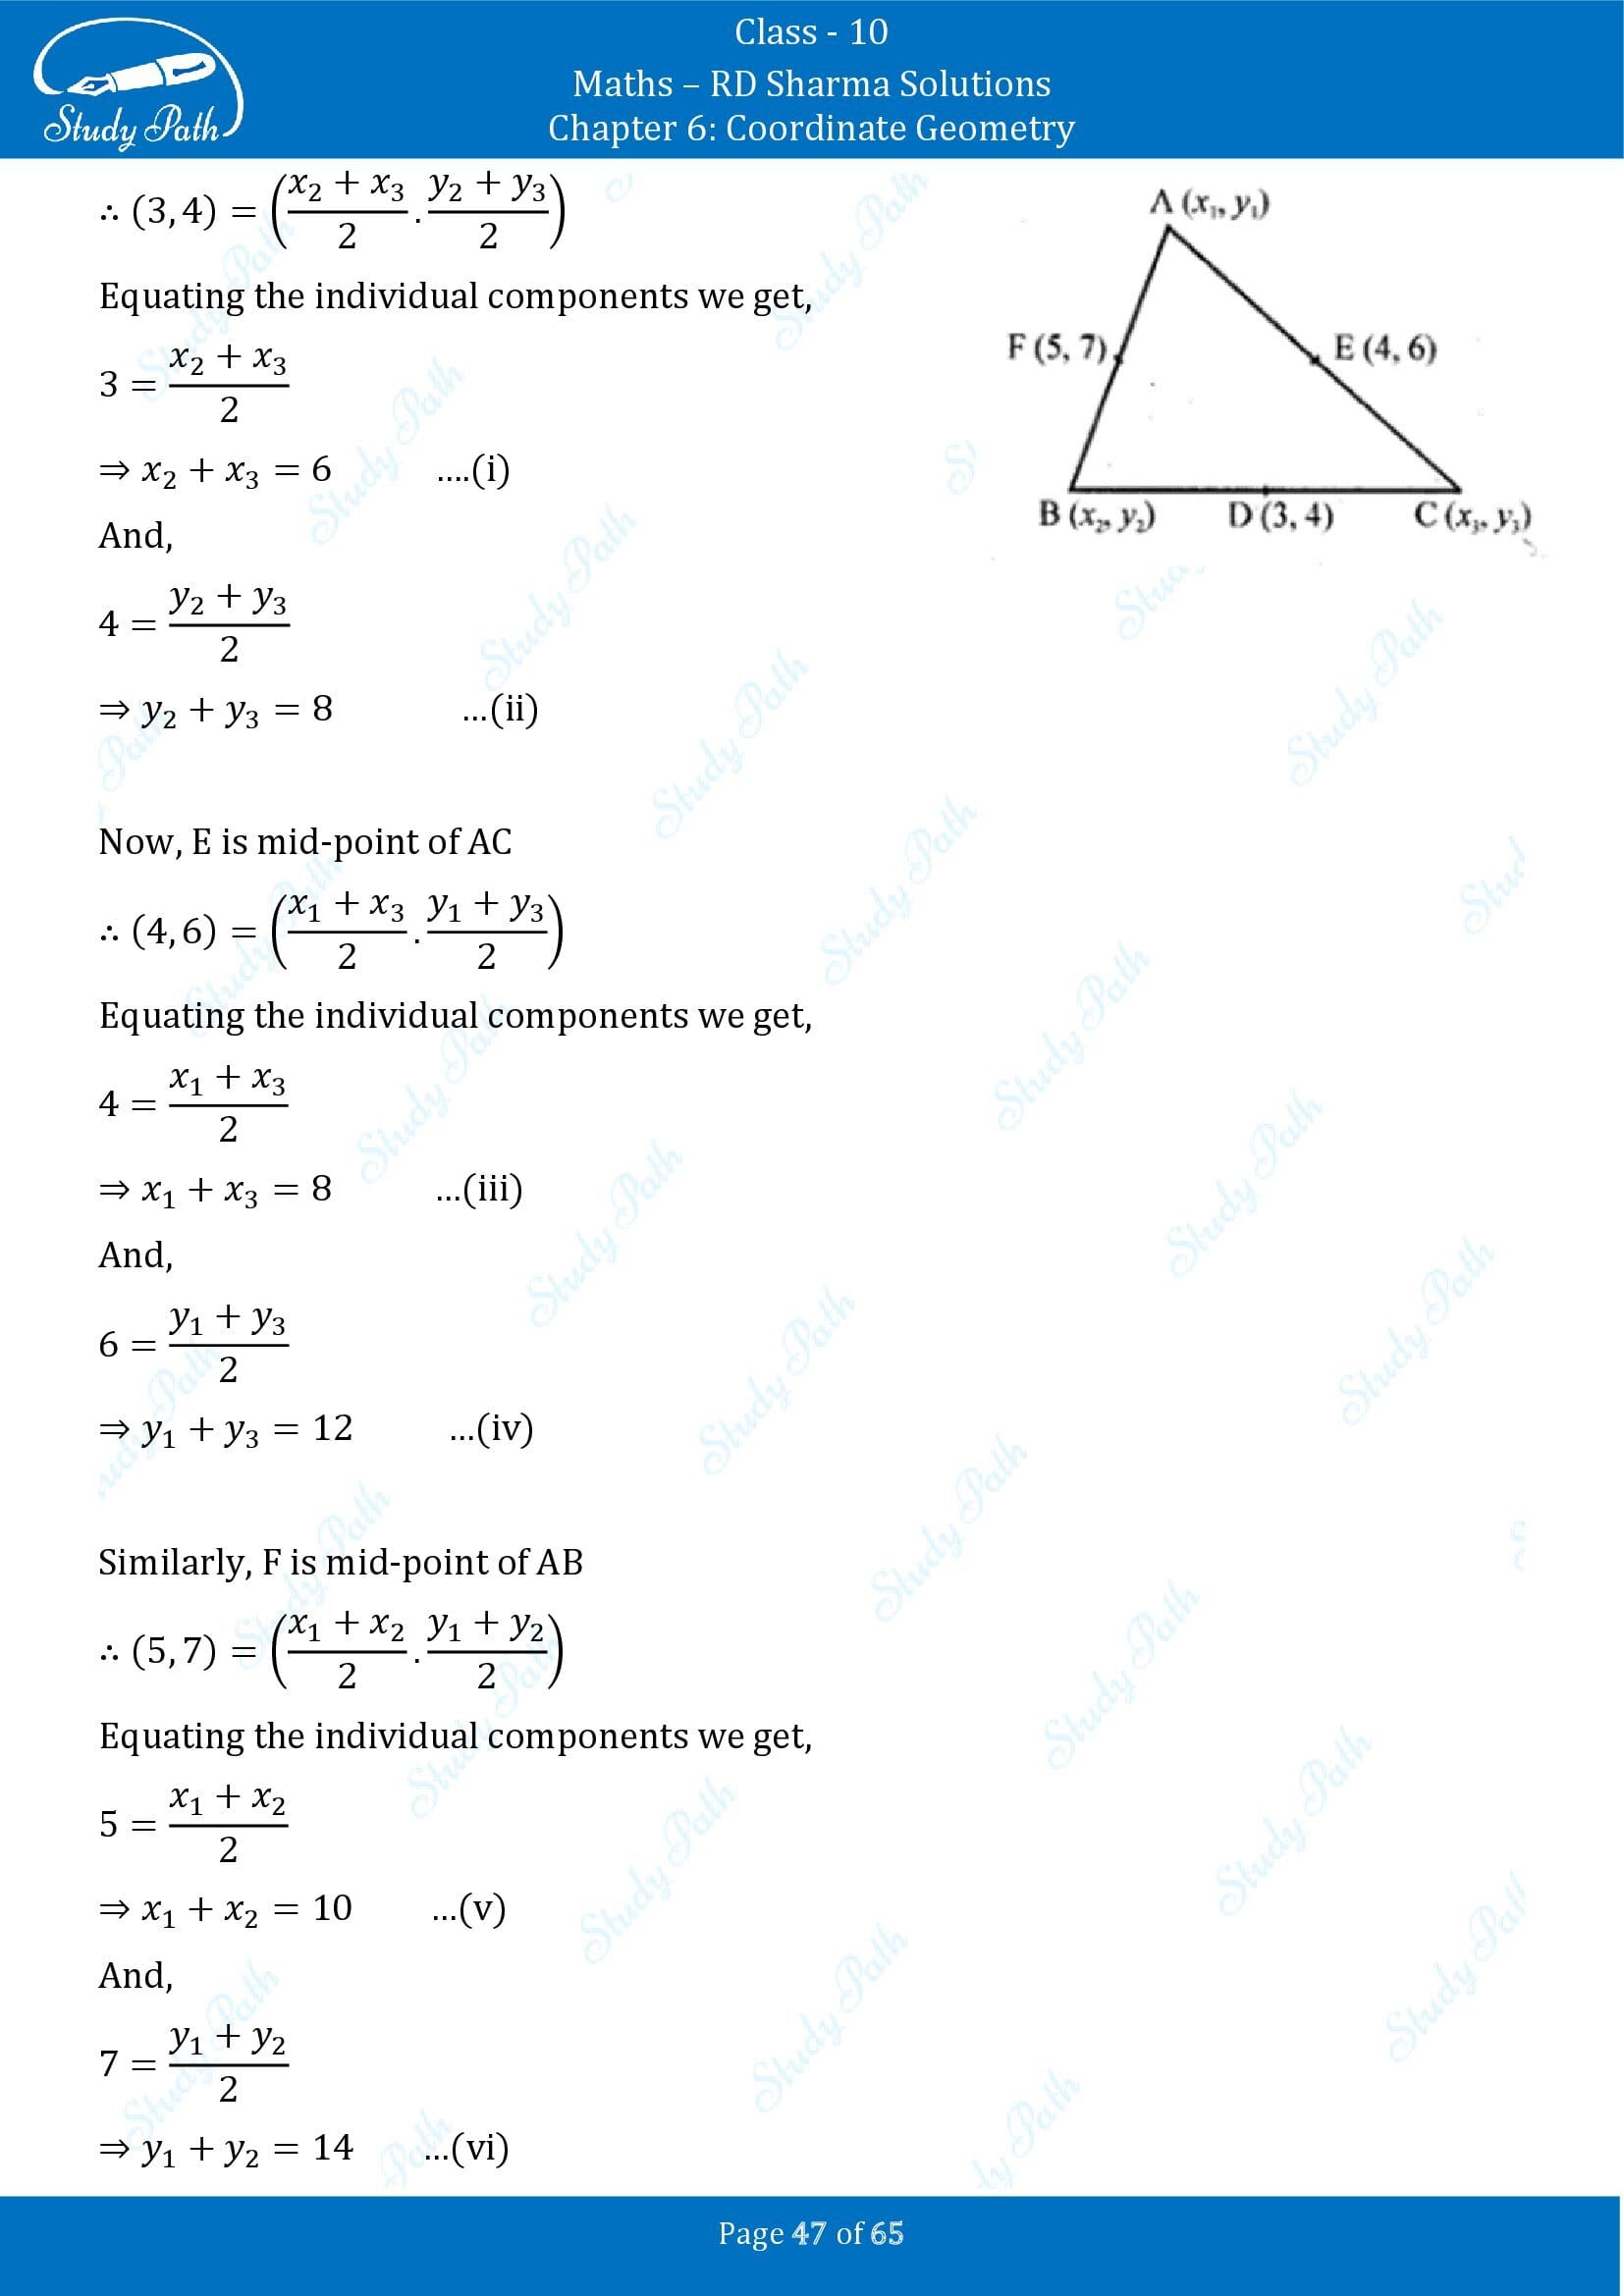 RD Sharma Solutions Class 10 Chapter 6 Coordinate Geometry Exercise 6.3 00047